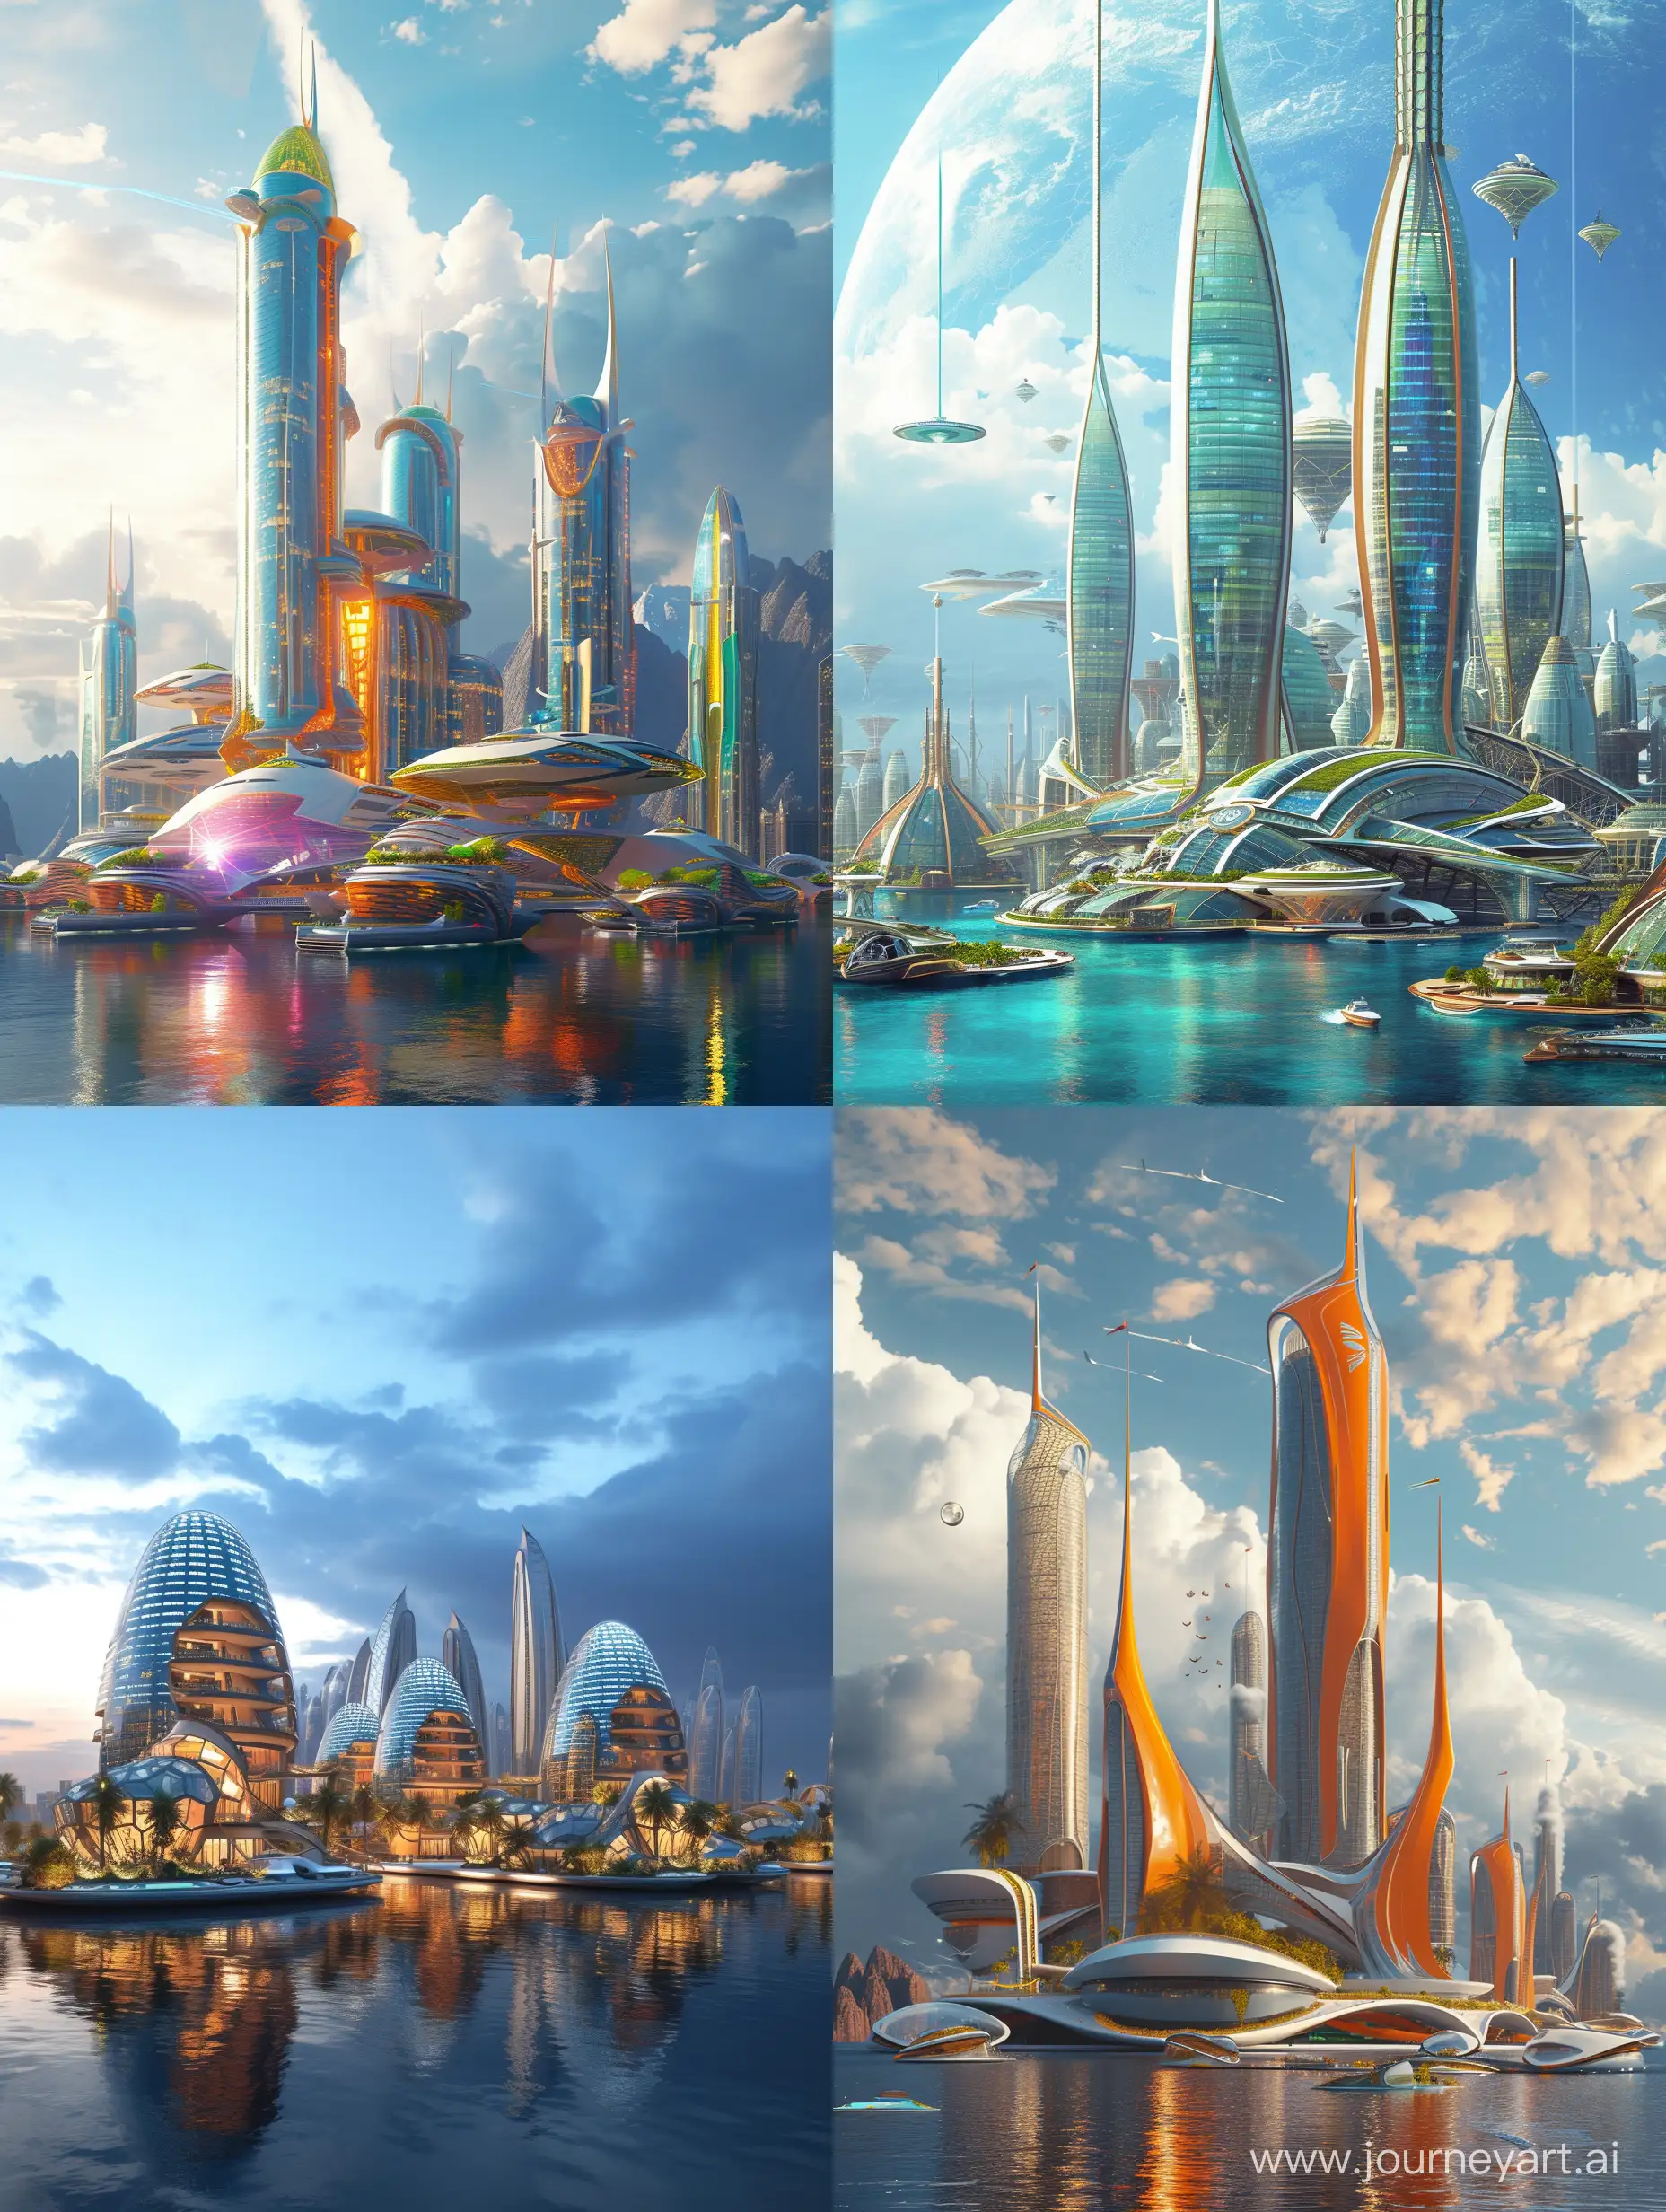 Create a vibrant and futuristic skyline of the floating city, emphasizing its sustainable architecture and innovative design